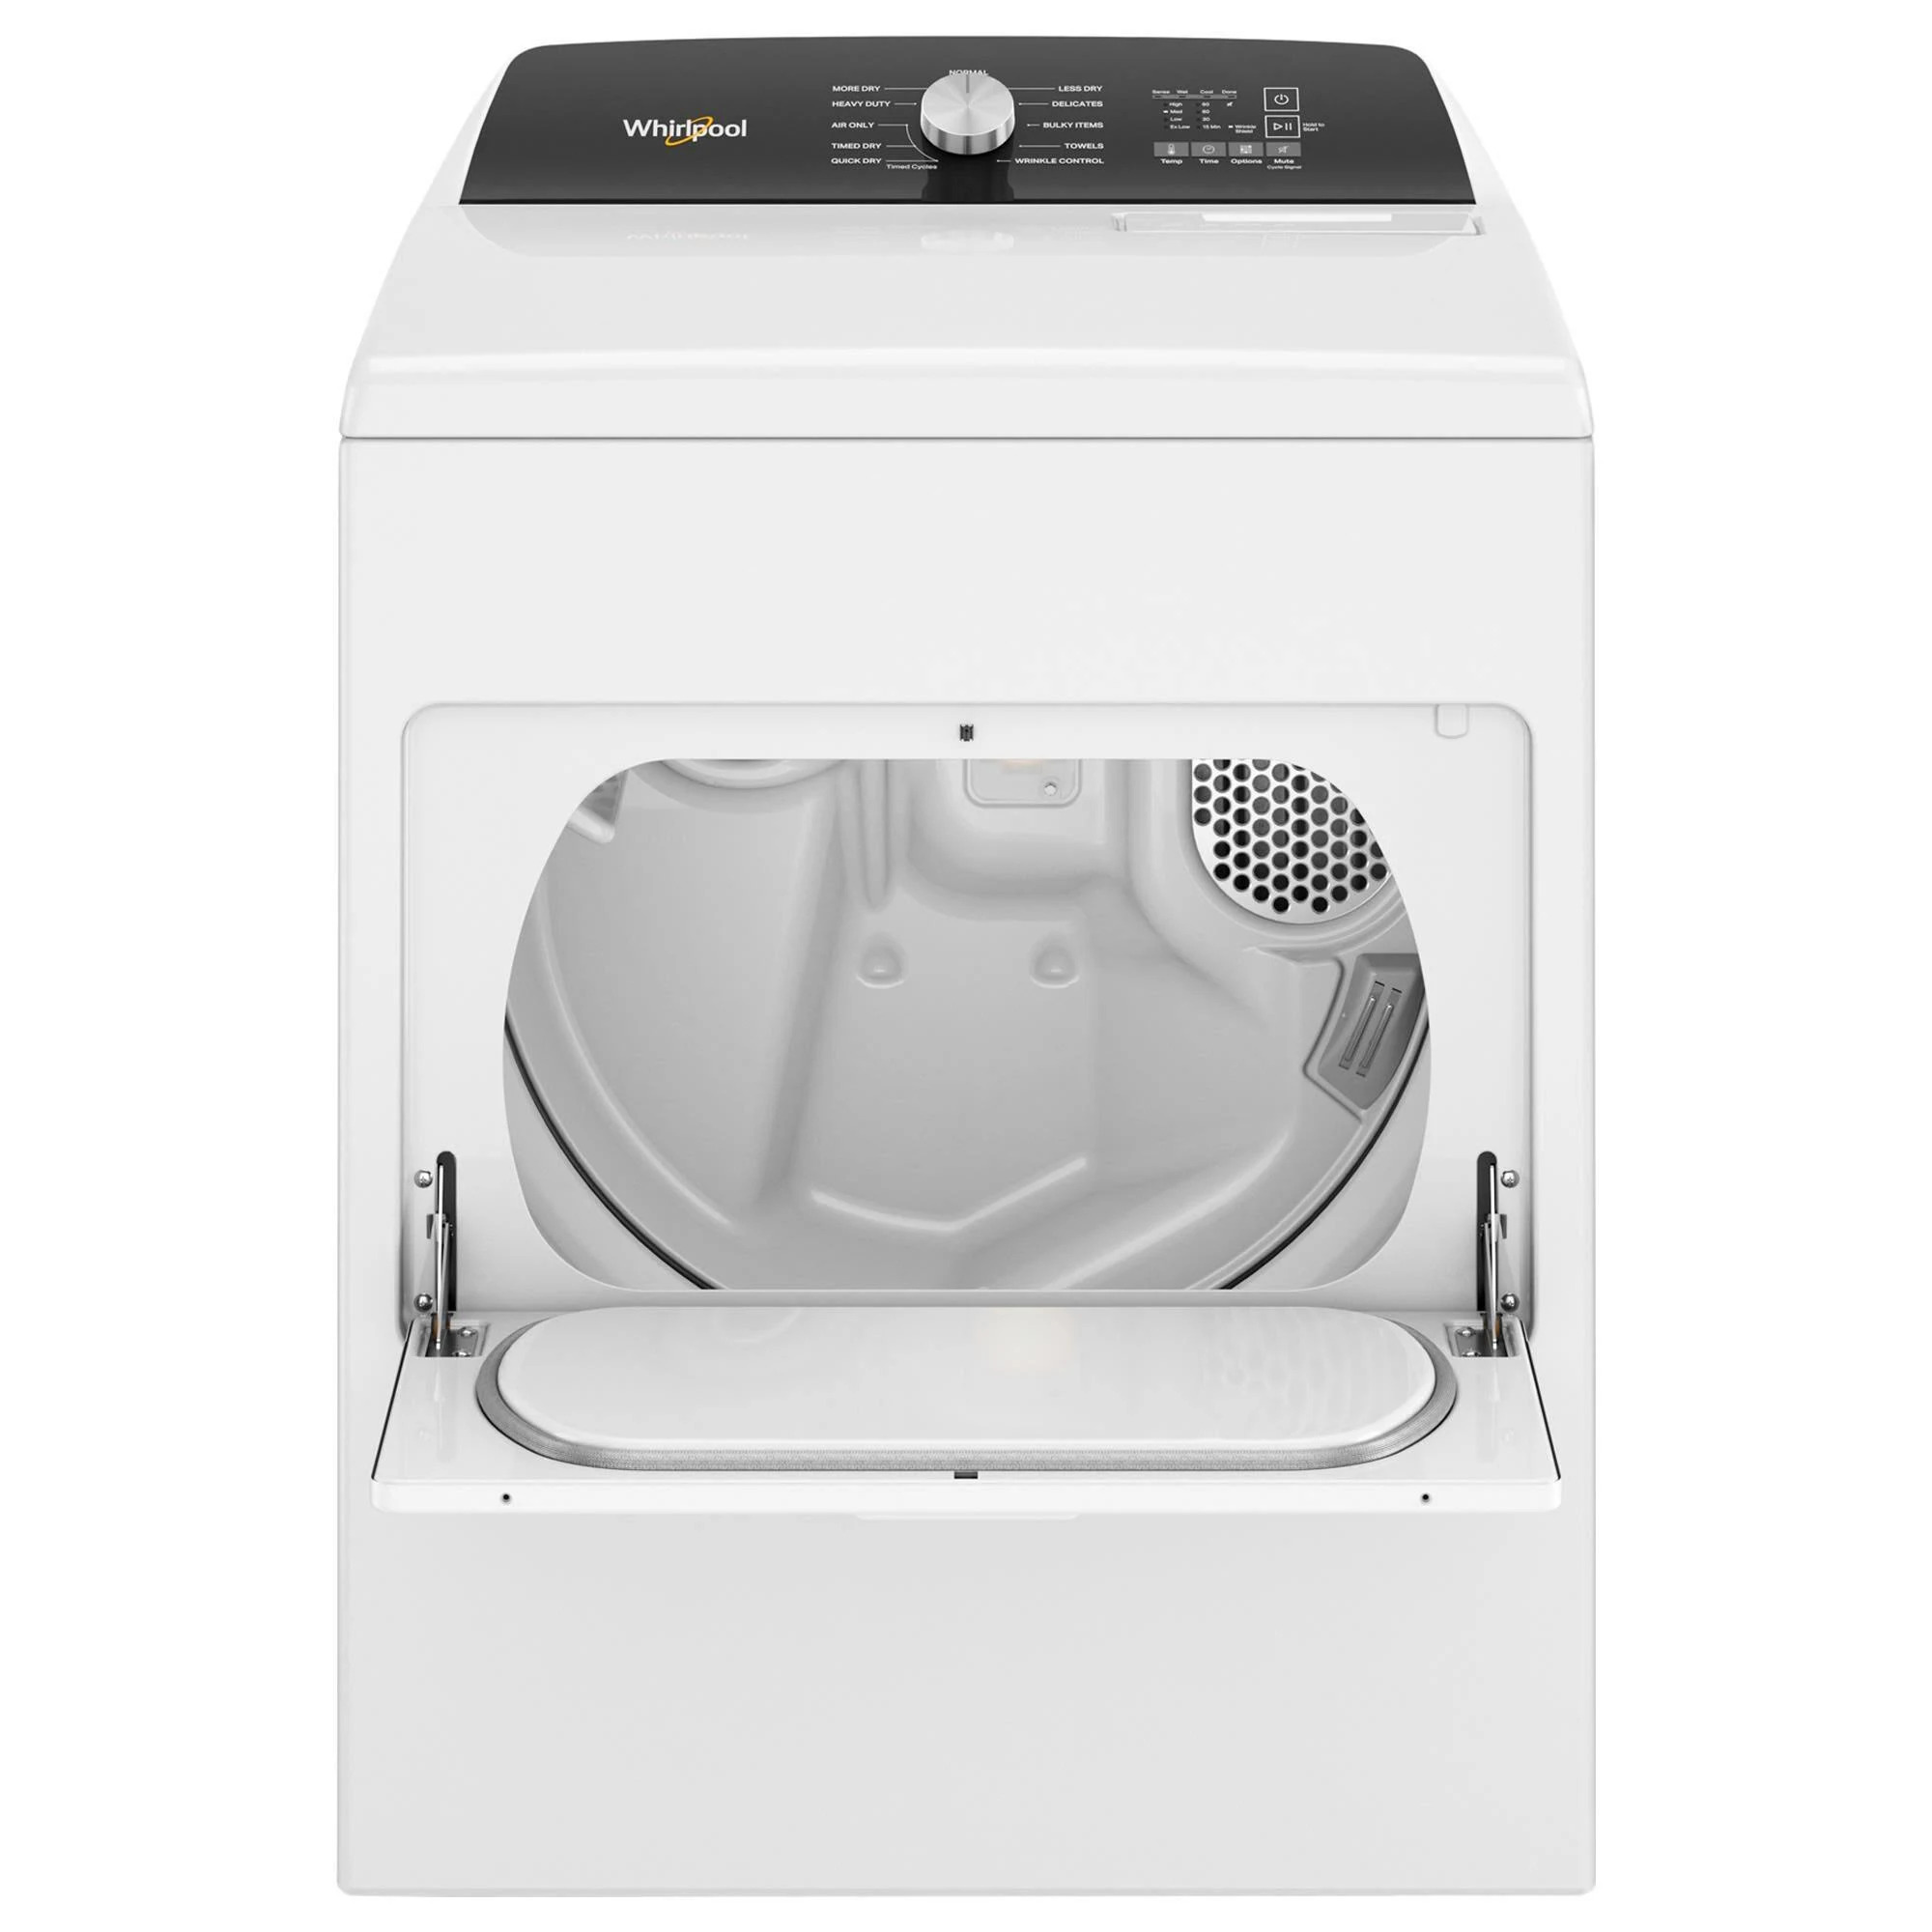 How To Fix The Error Code F81 For Whirlpool Dryer